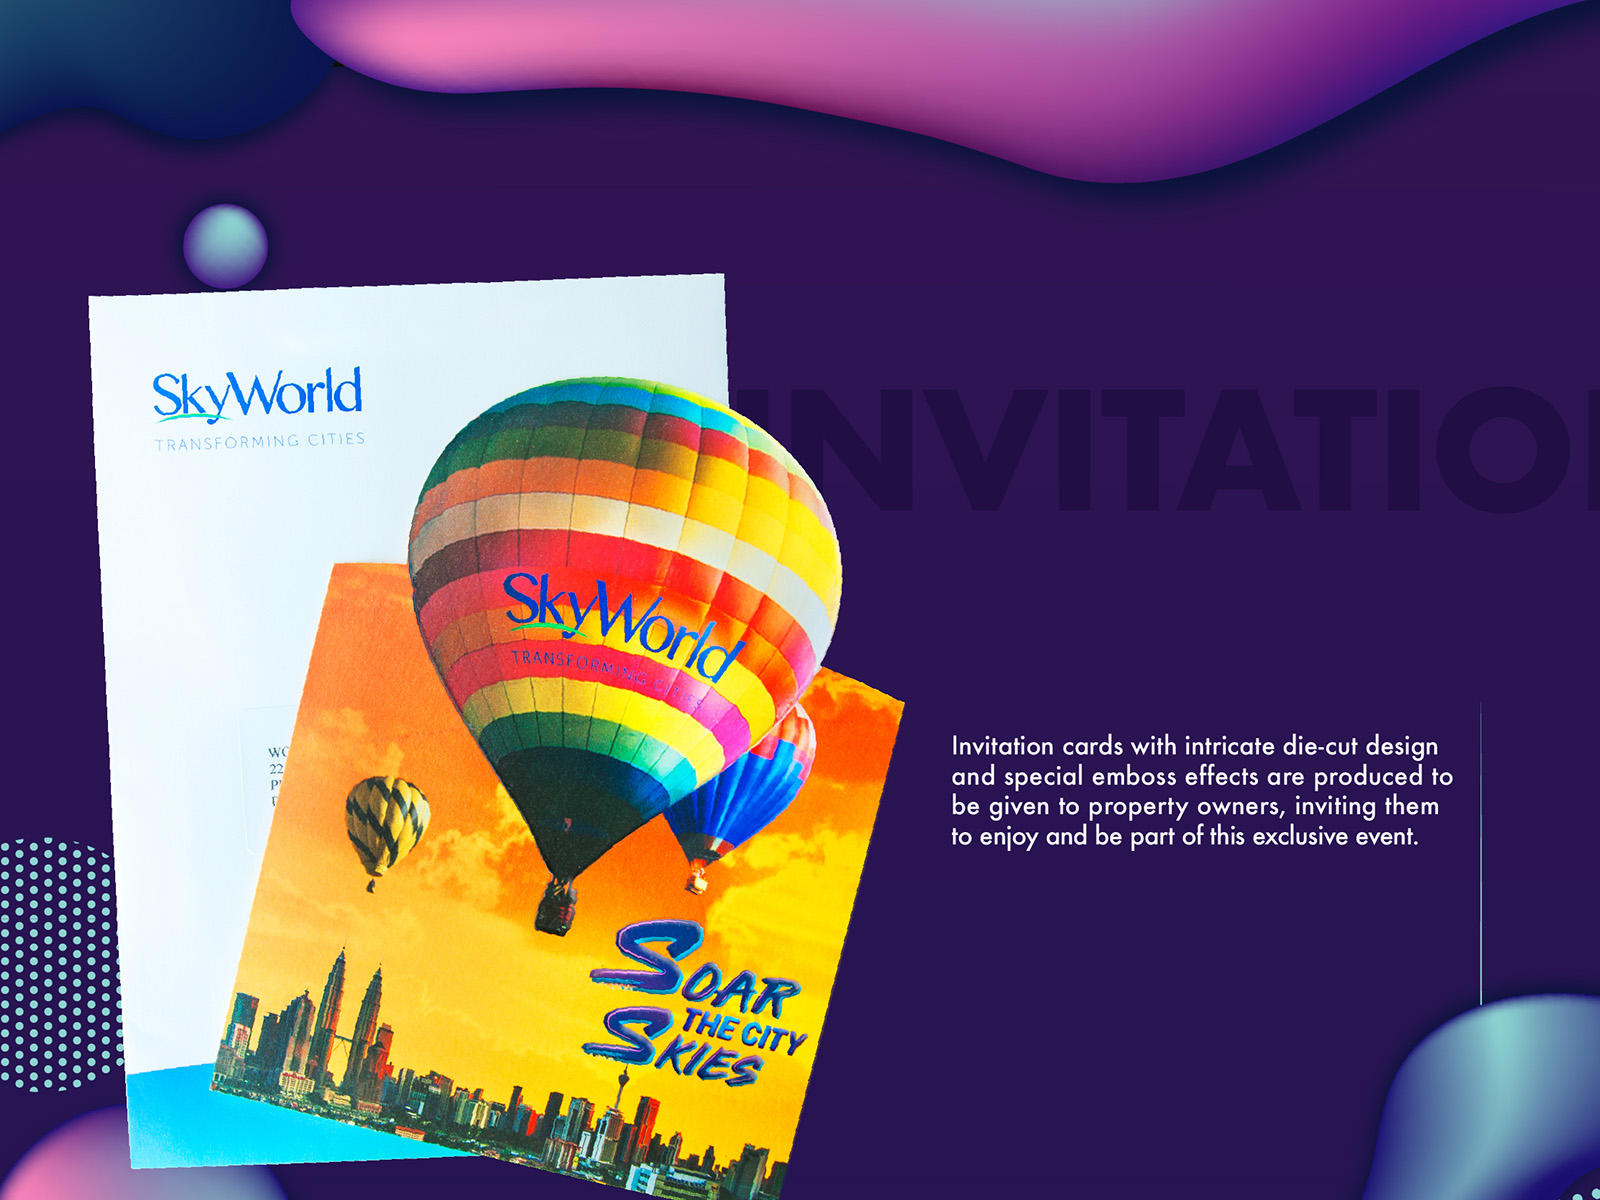 Skyworld Soar The City Skies campaign key visual design adapted to invitation card with balloon diecut